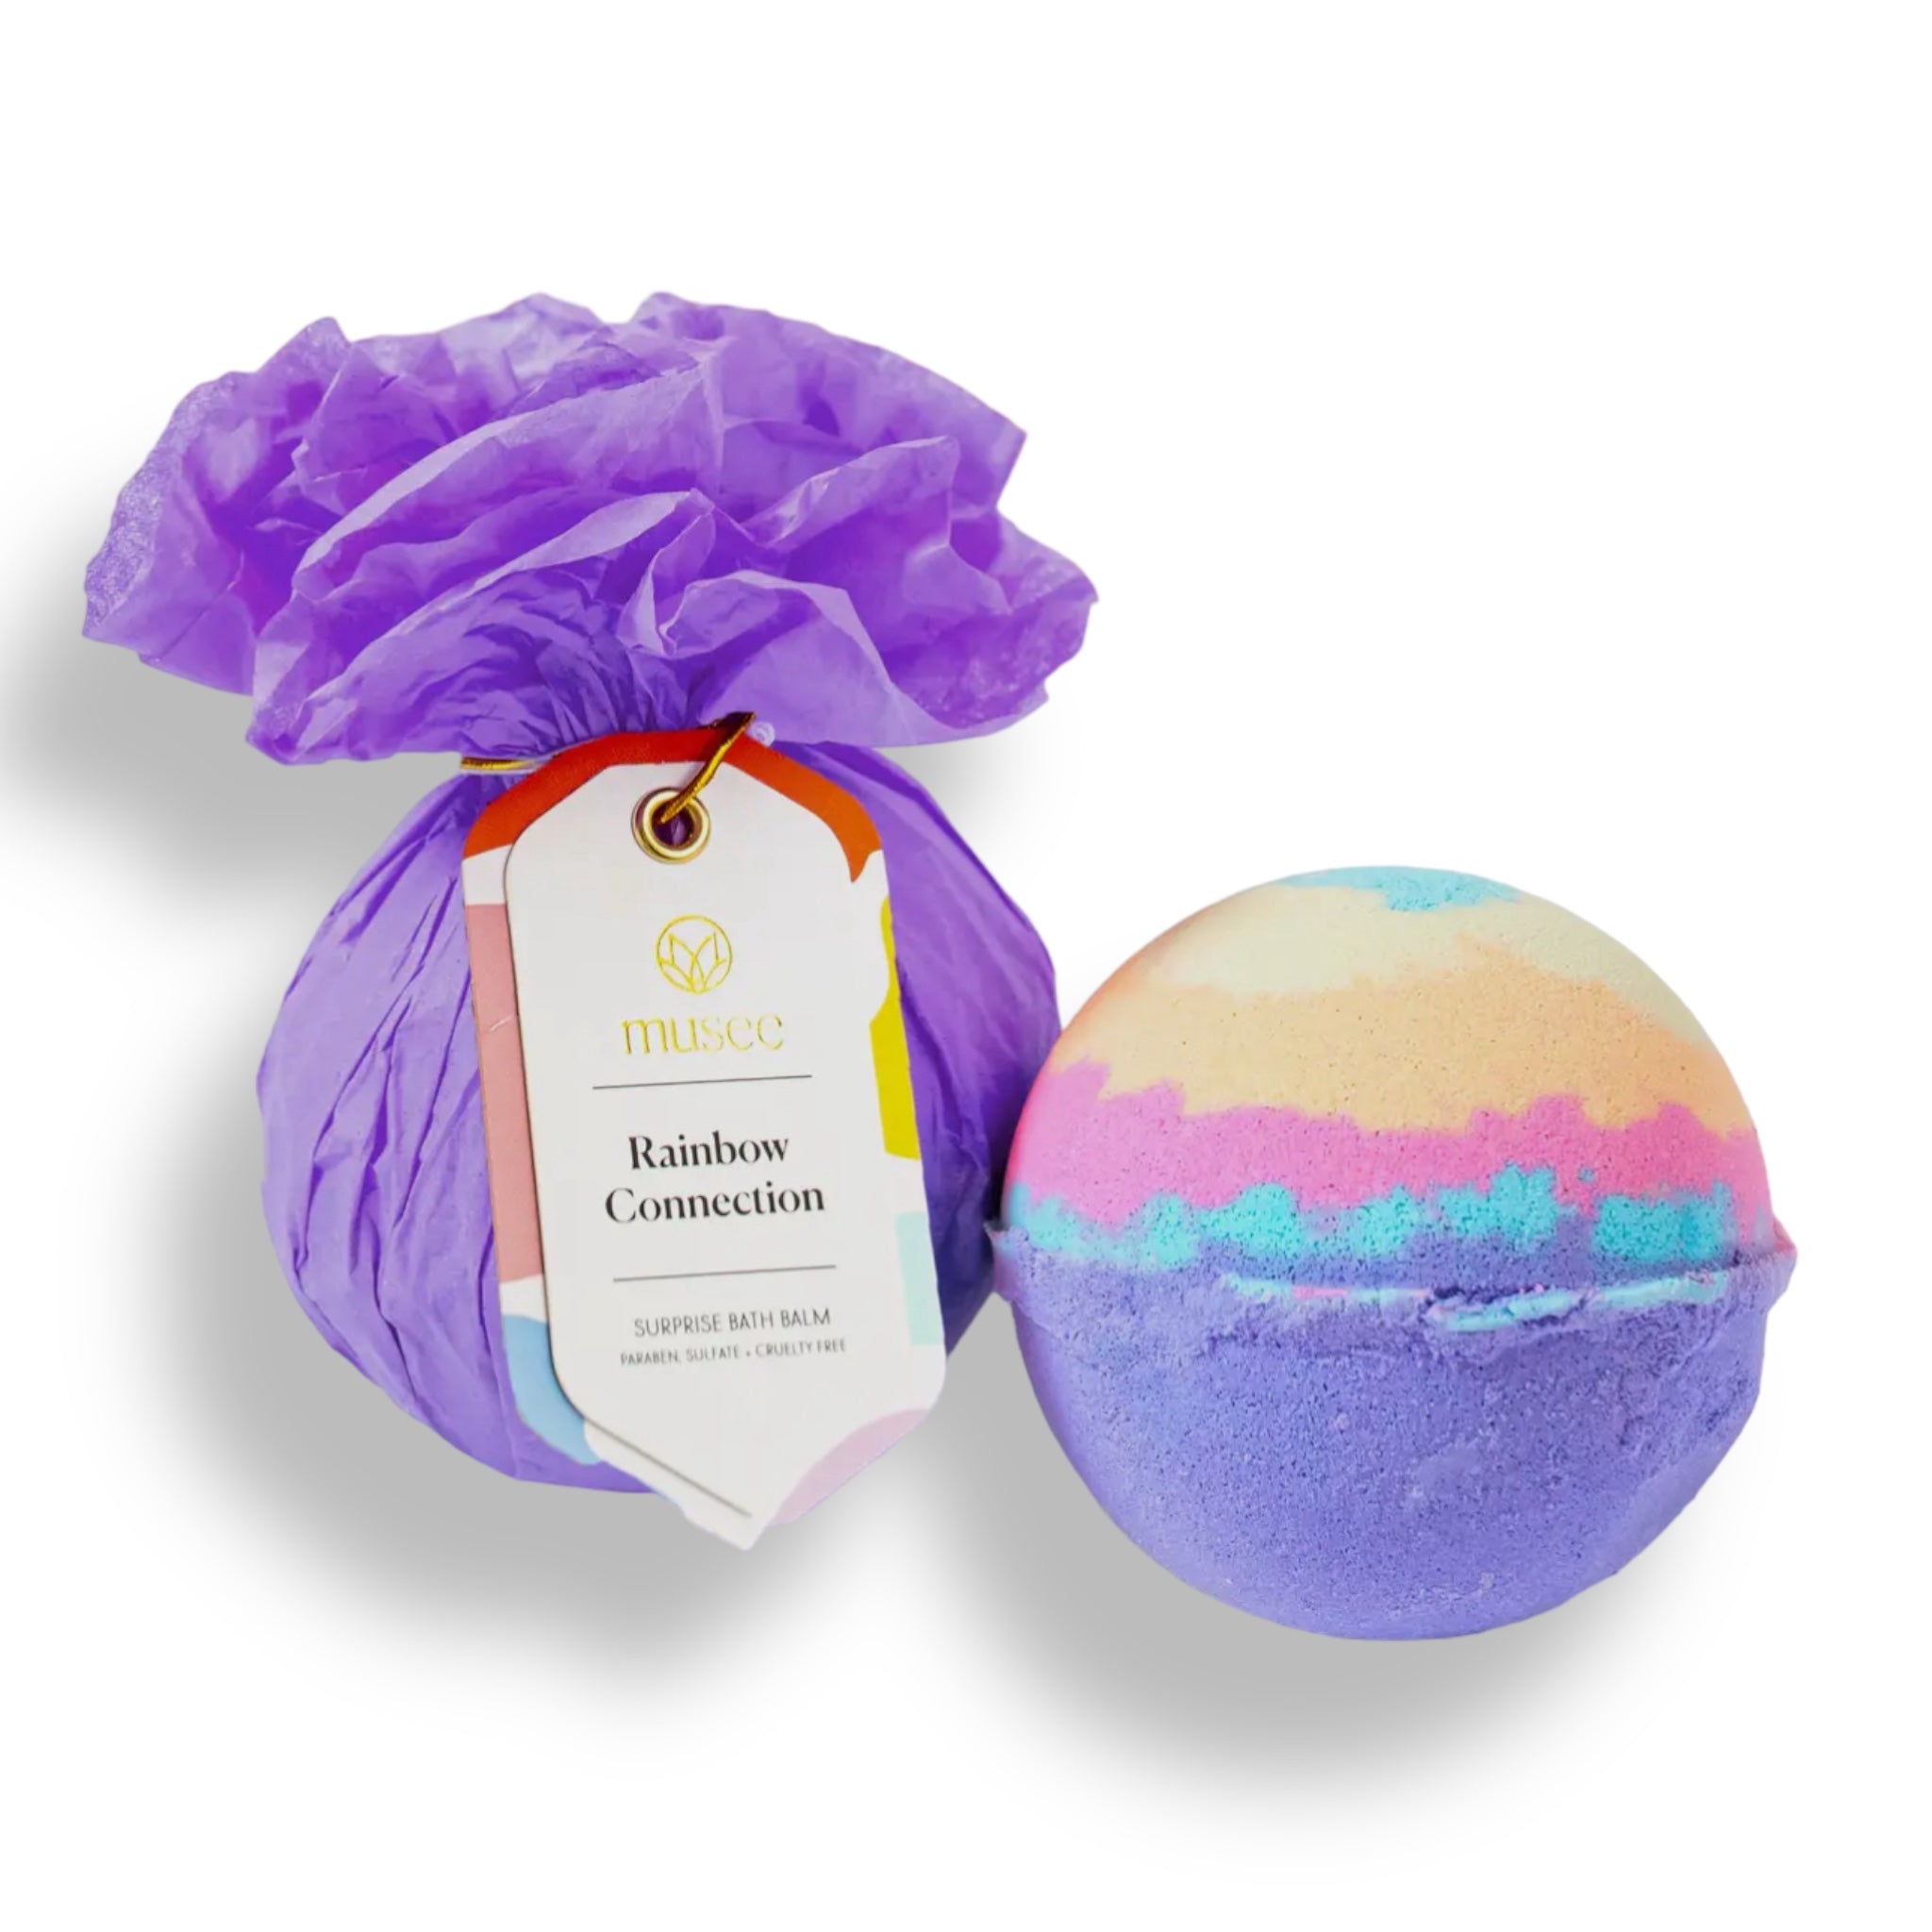 Bath Bomb with Surprise - RAINBOW CONNECTION (Lily + Vanilla) MUSEE BATH